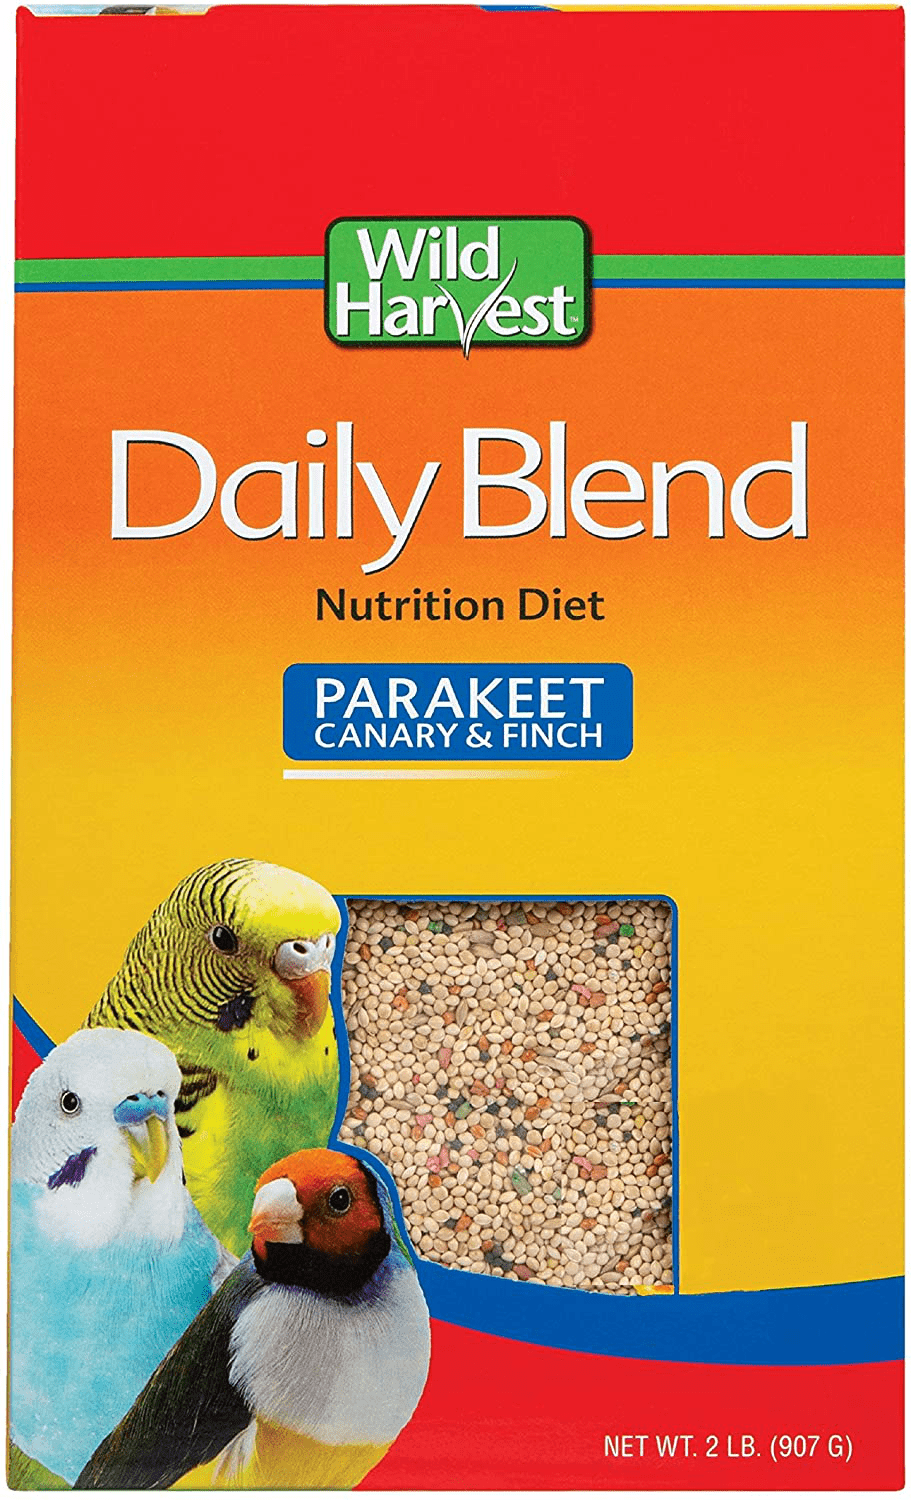 Wild Harvest Daily Blend for Parakeet, Canary, Finch & Small Birds 2Lb